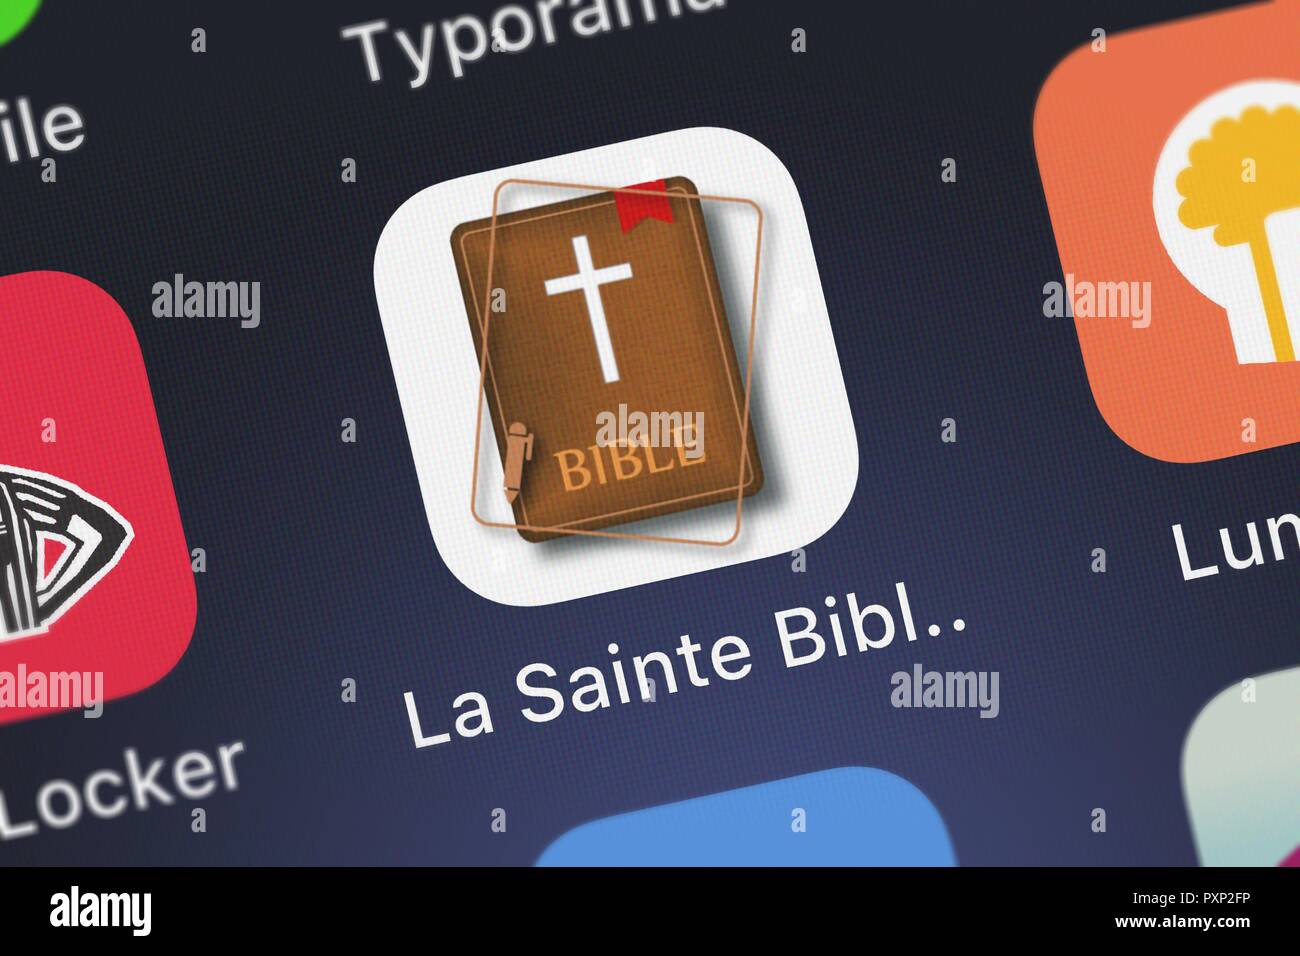 London, United Kingdom - October 23, 2018: Close-up of the La Sainte Bible Darby en Français (French Audio) icon from Oleg Shukalovich on an iPhone. Stock Photo